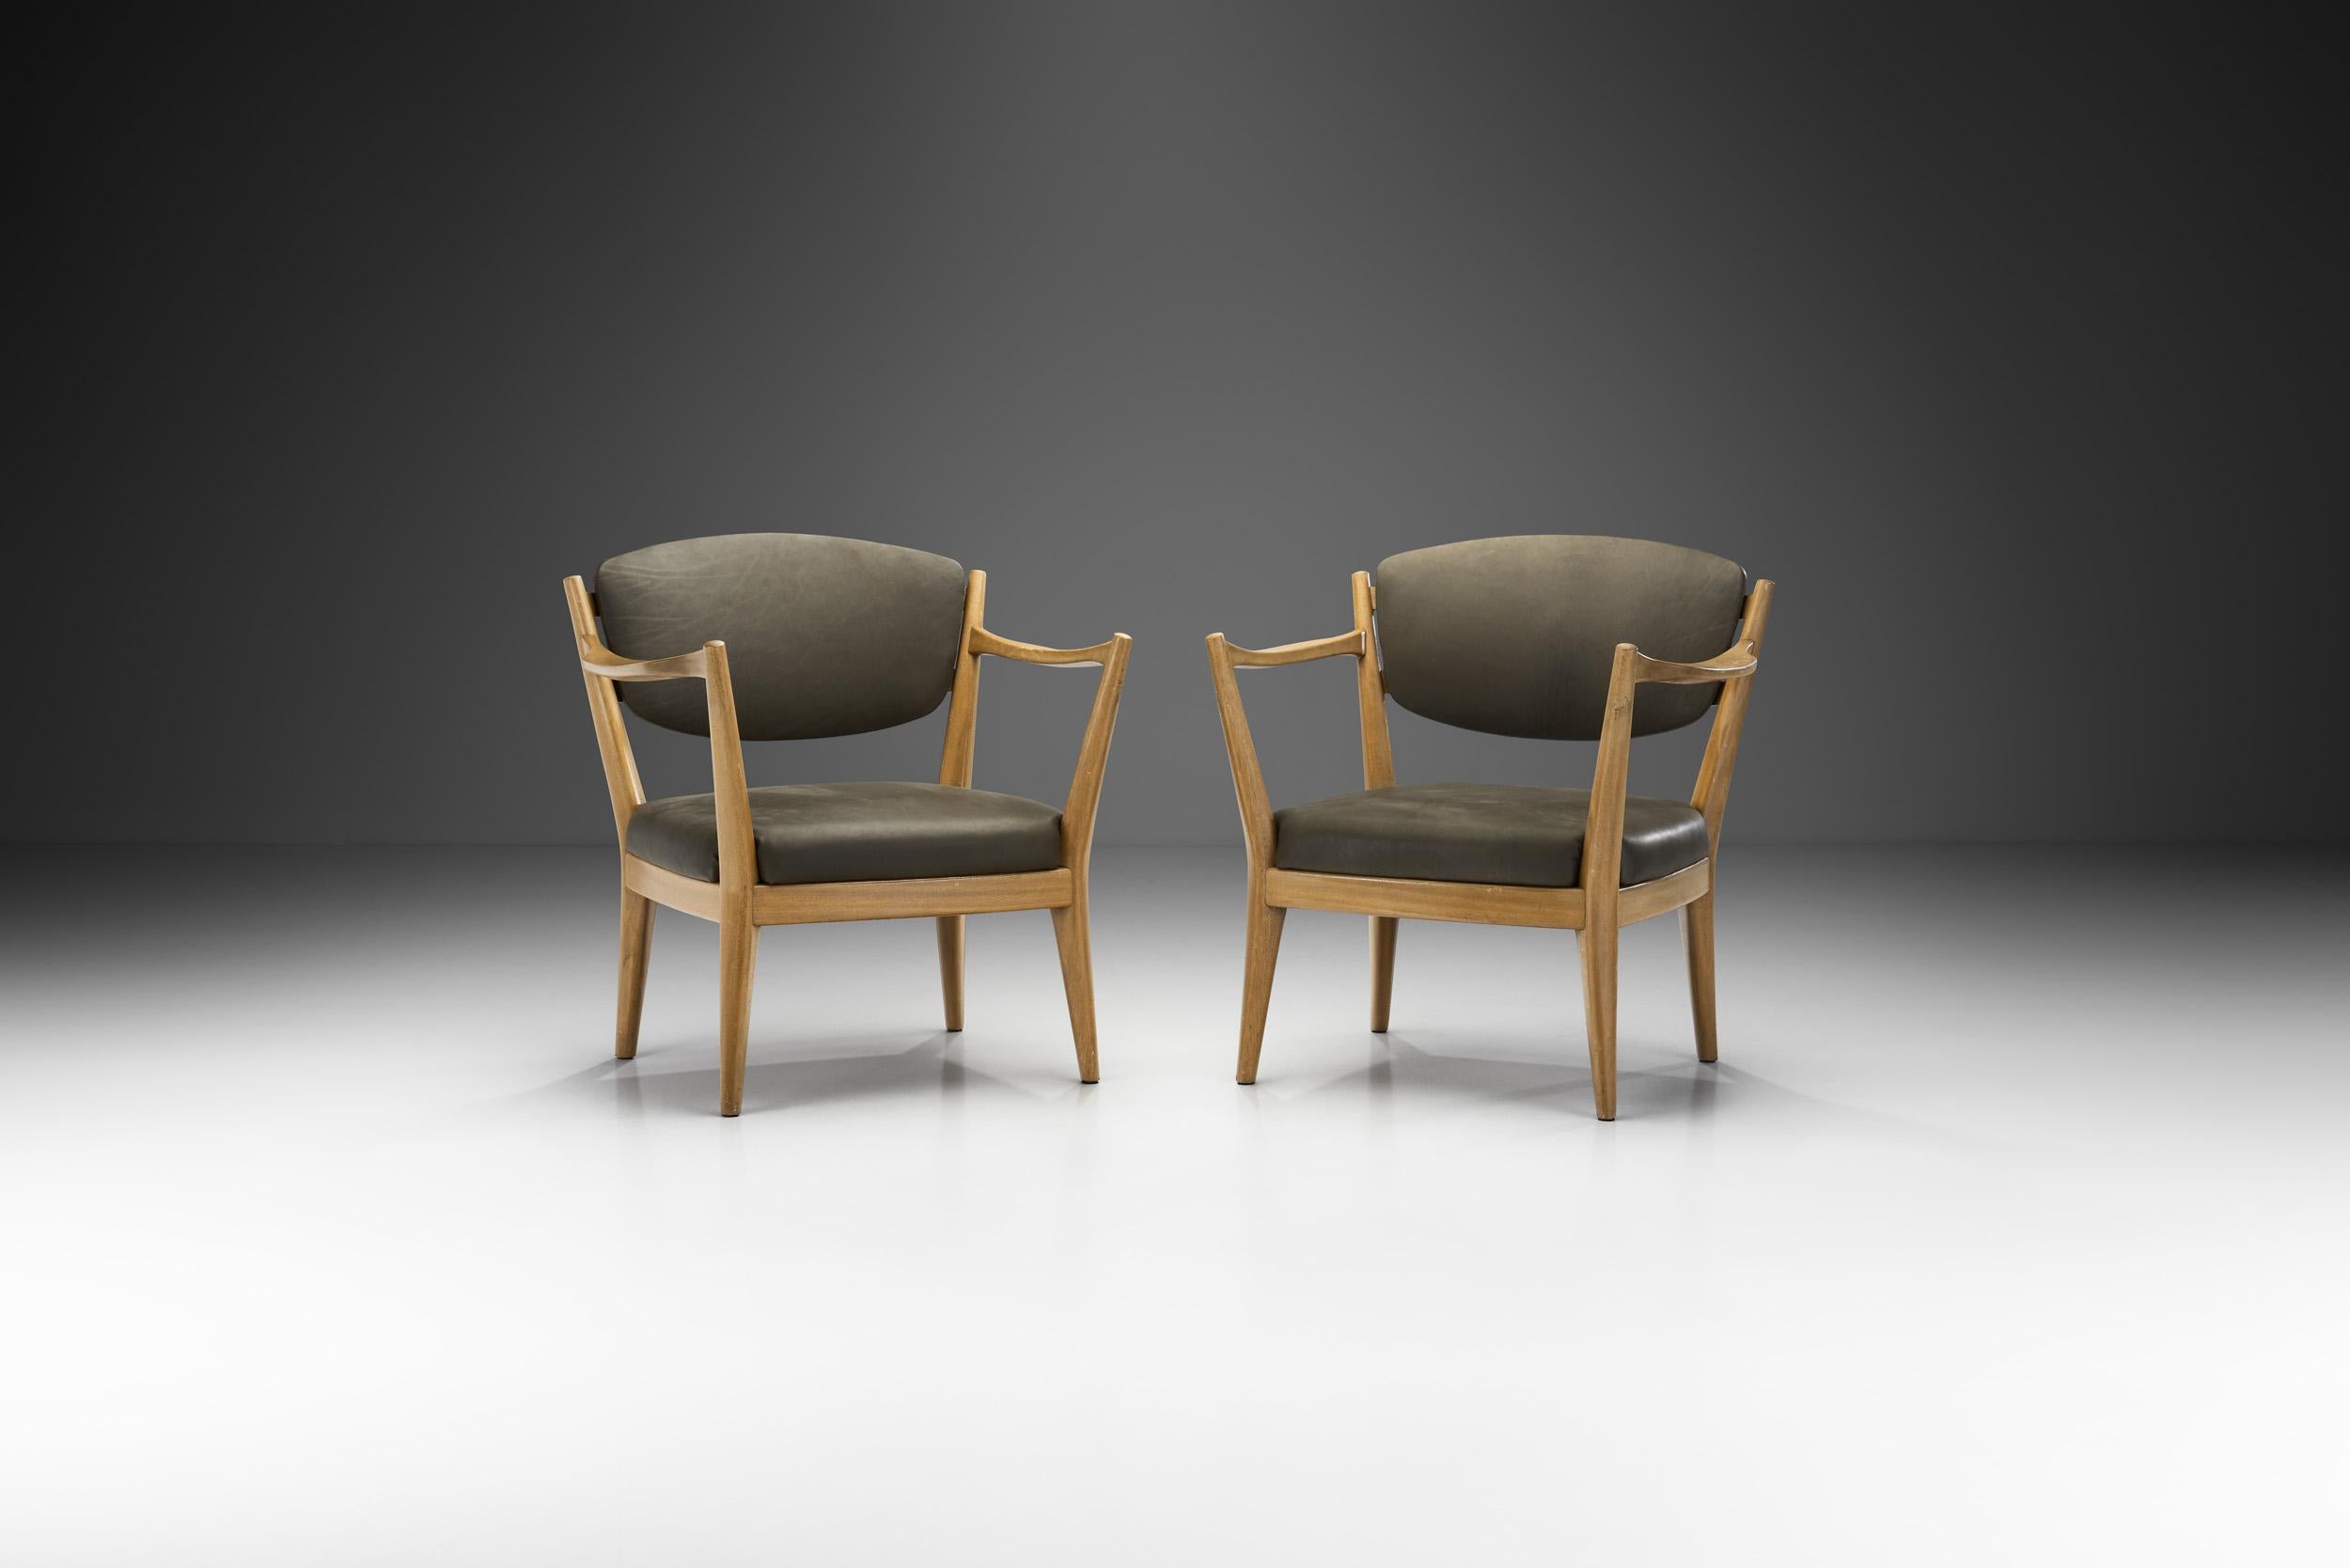 Designed in 1946 by Norwegian designers, Adolf Relling & Frederik Kayser, these so called “Kaminstolen” are a distinct pair thanks to their peculiar frame. The name can be roughly translated as “fireplace or stove chair”. Besides the unique look,